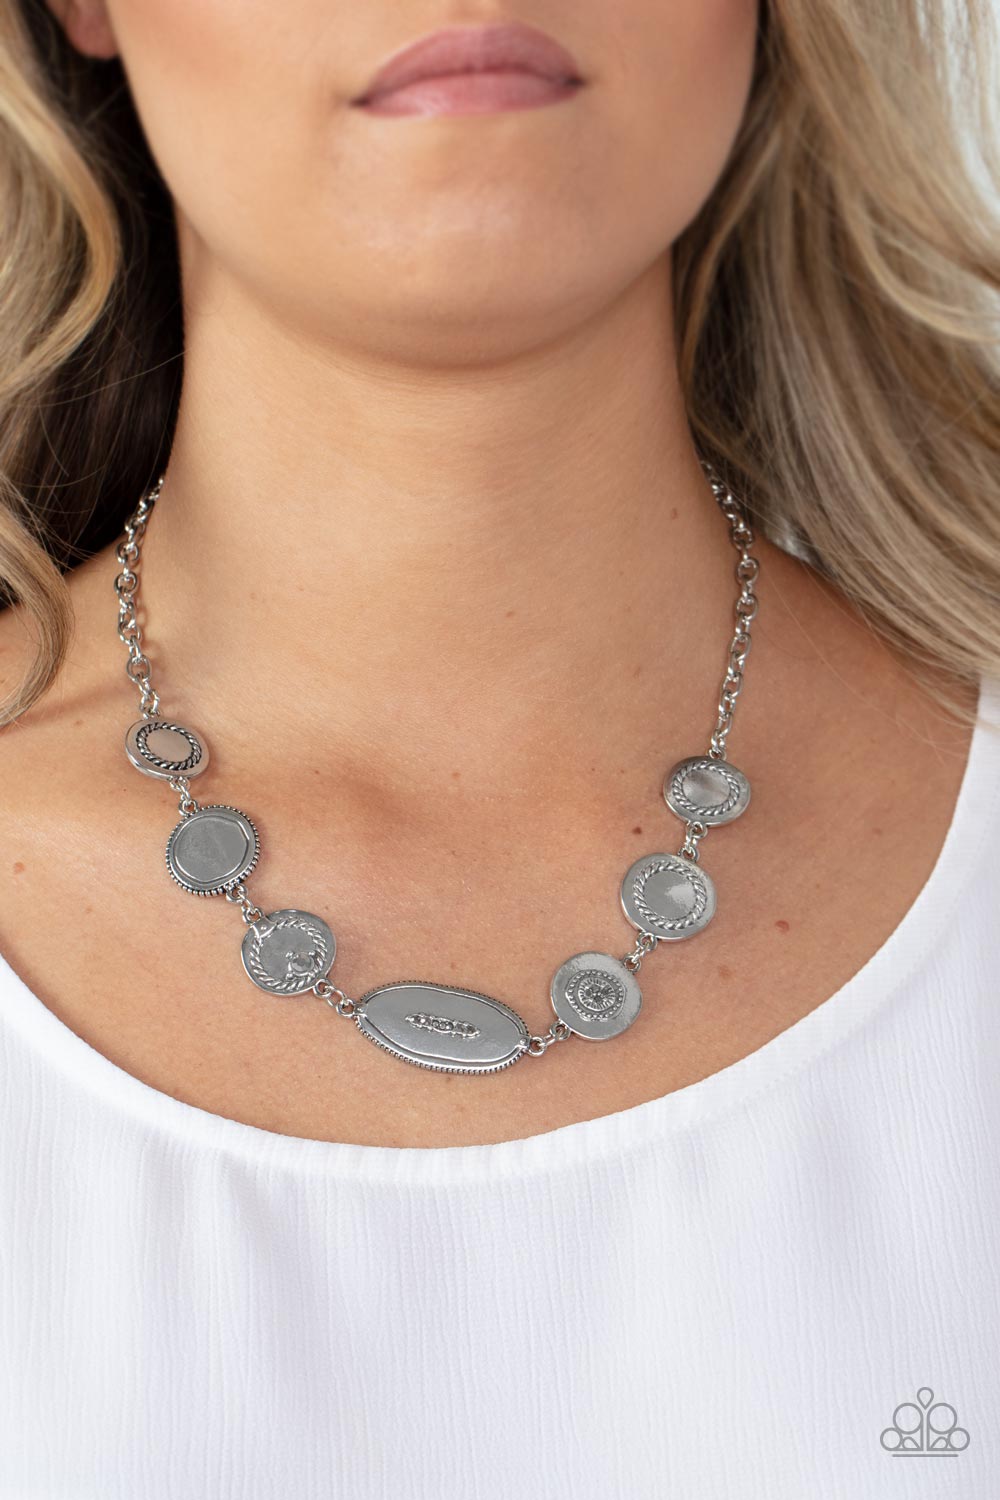 Sporadically dotted in dainty hematite rhinestones and metallic rope-like texture, an asymmetrical assortment of shiny silver frames delicately link below the collar for a one-of-a-kind shimmer. Features an adjustable clasp closure.  Sold as one individual necklace. Includes one pair of matching earrings.